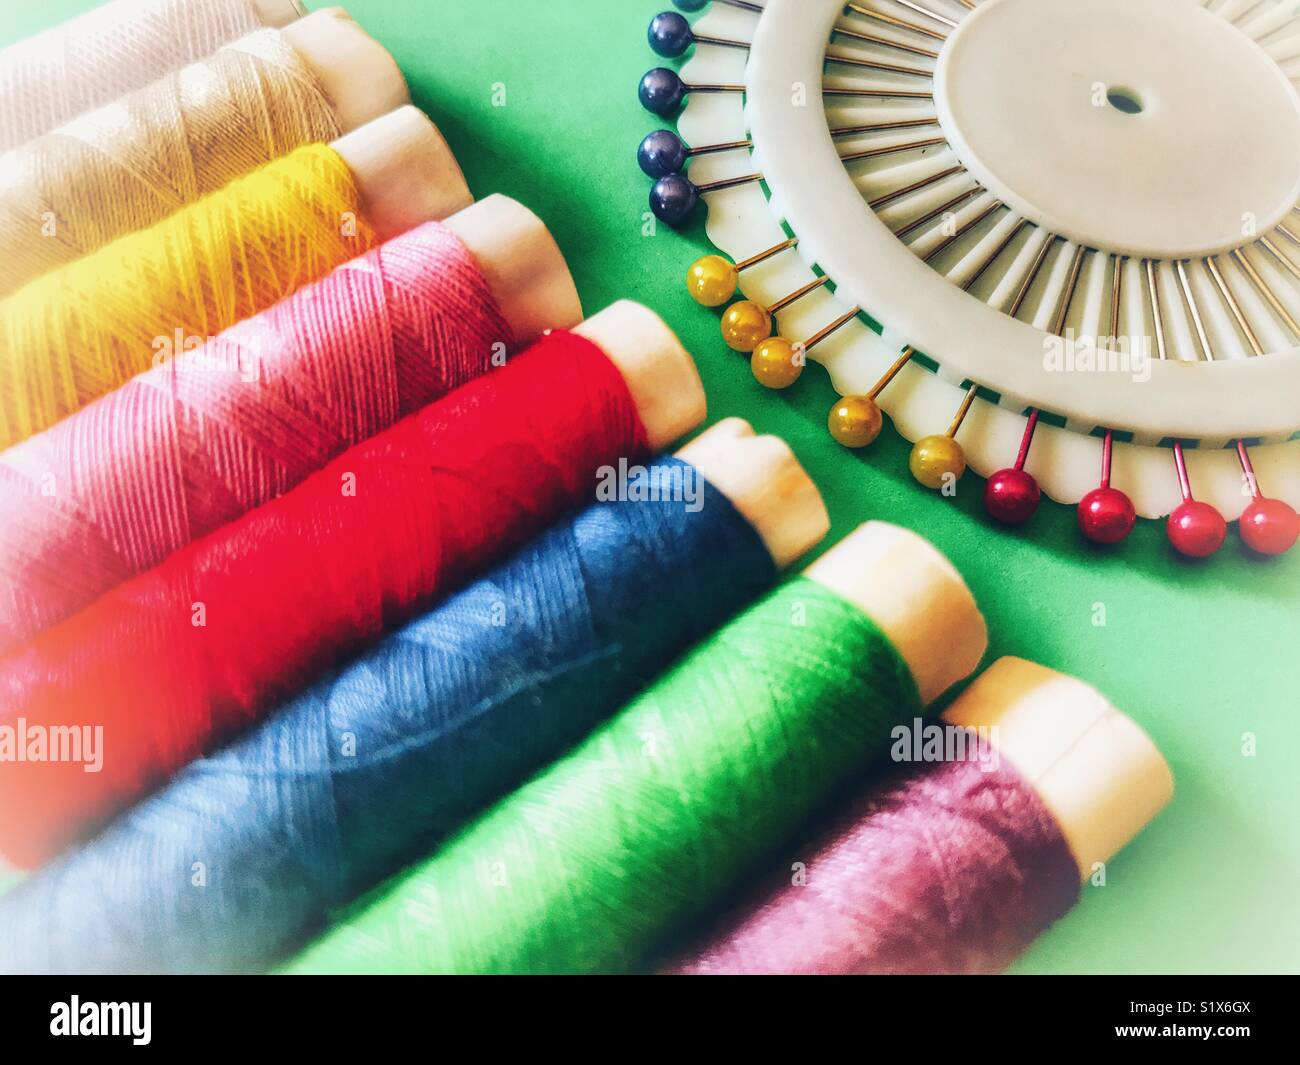 Sewing kit, colourful cotton thread and pins Stock Photo